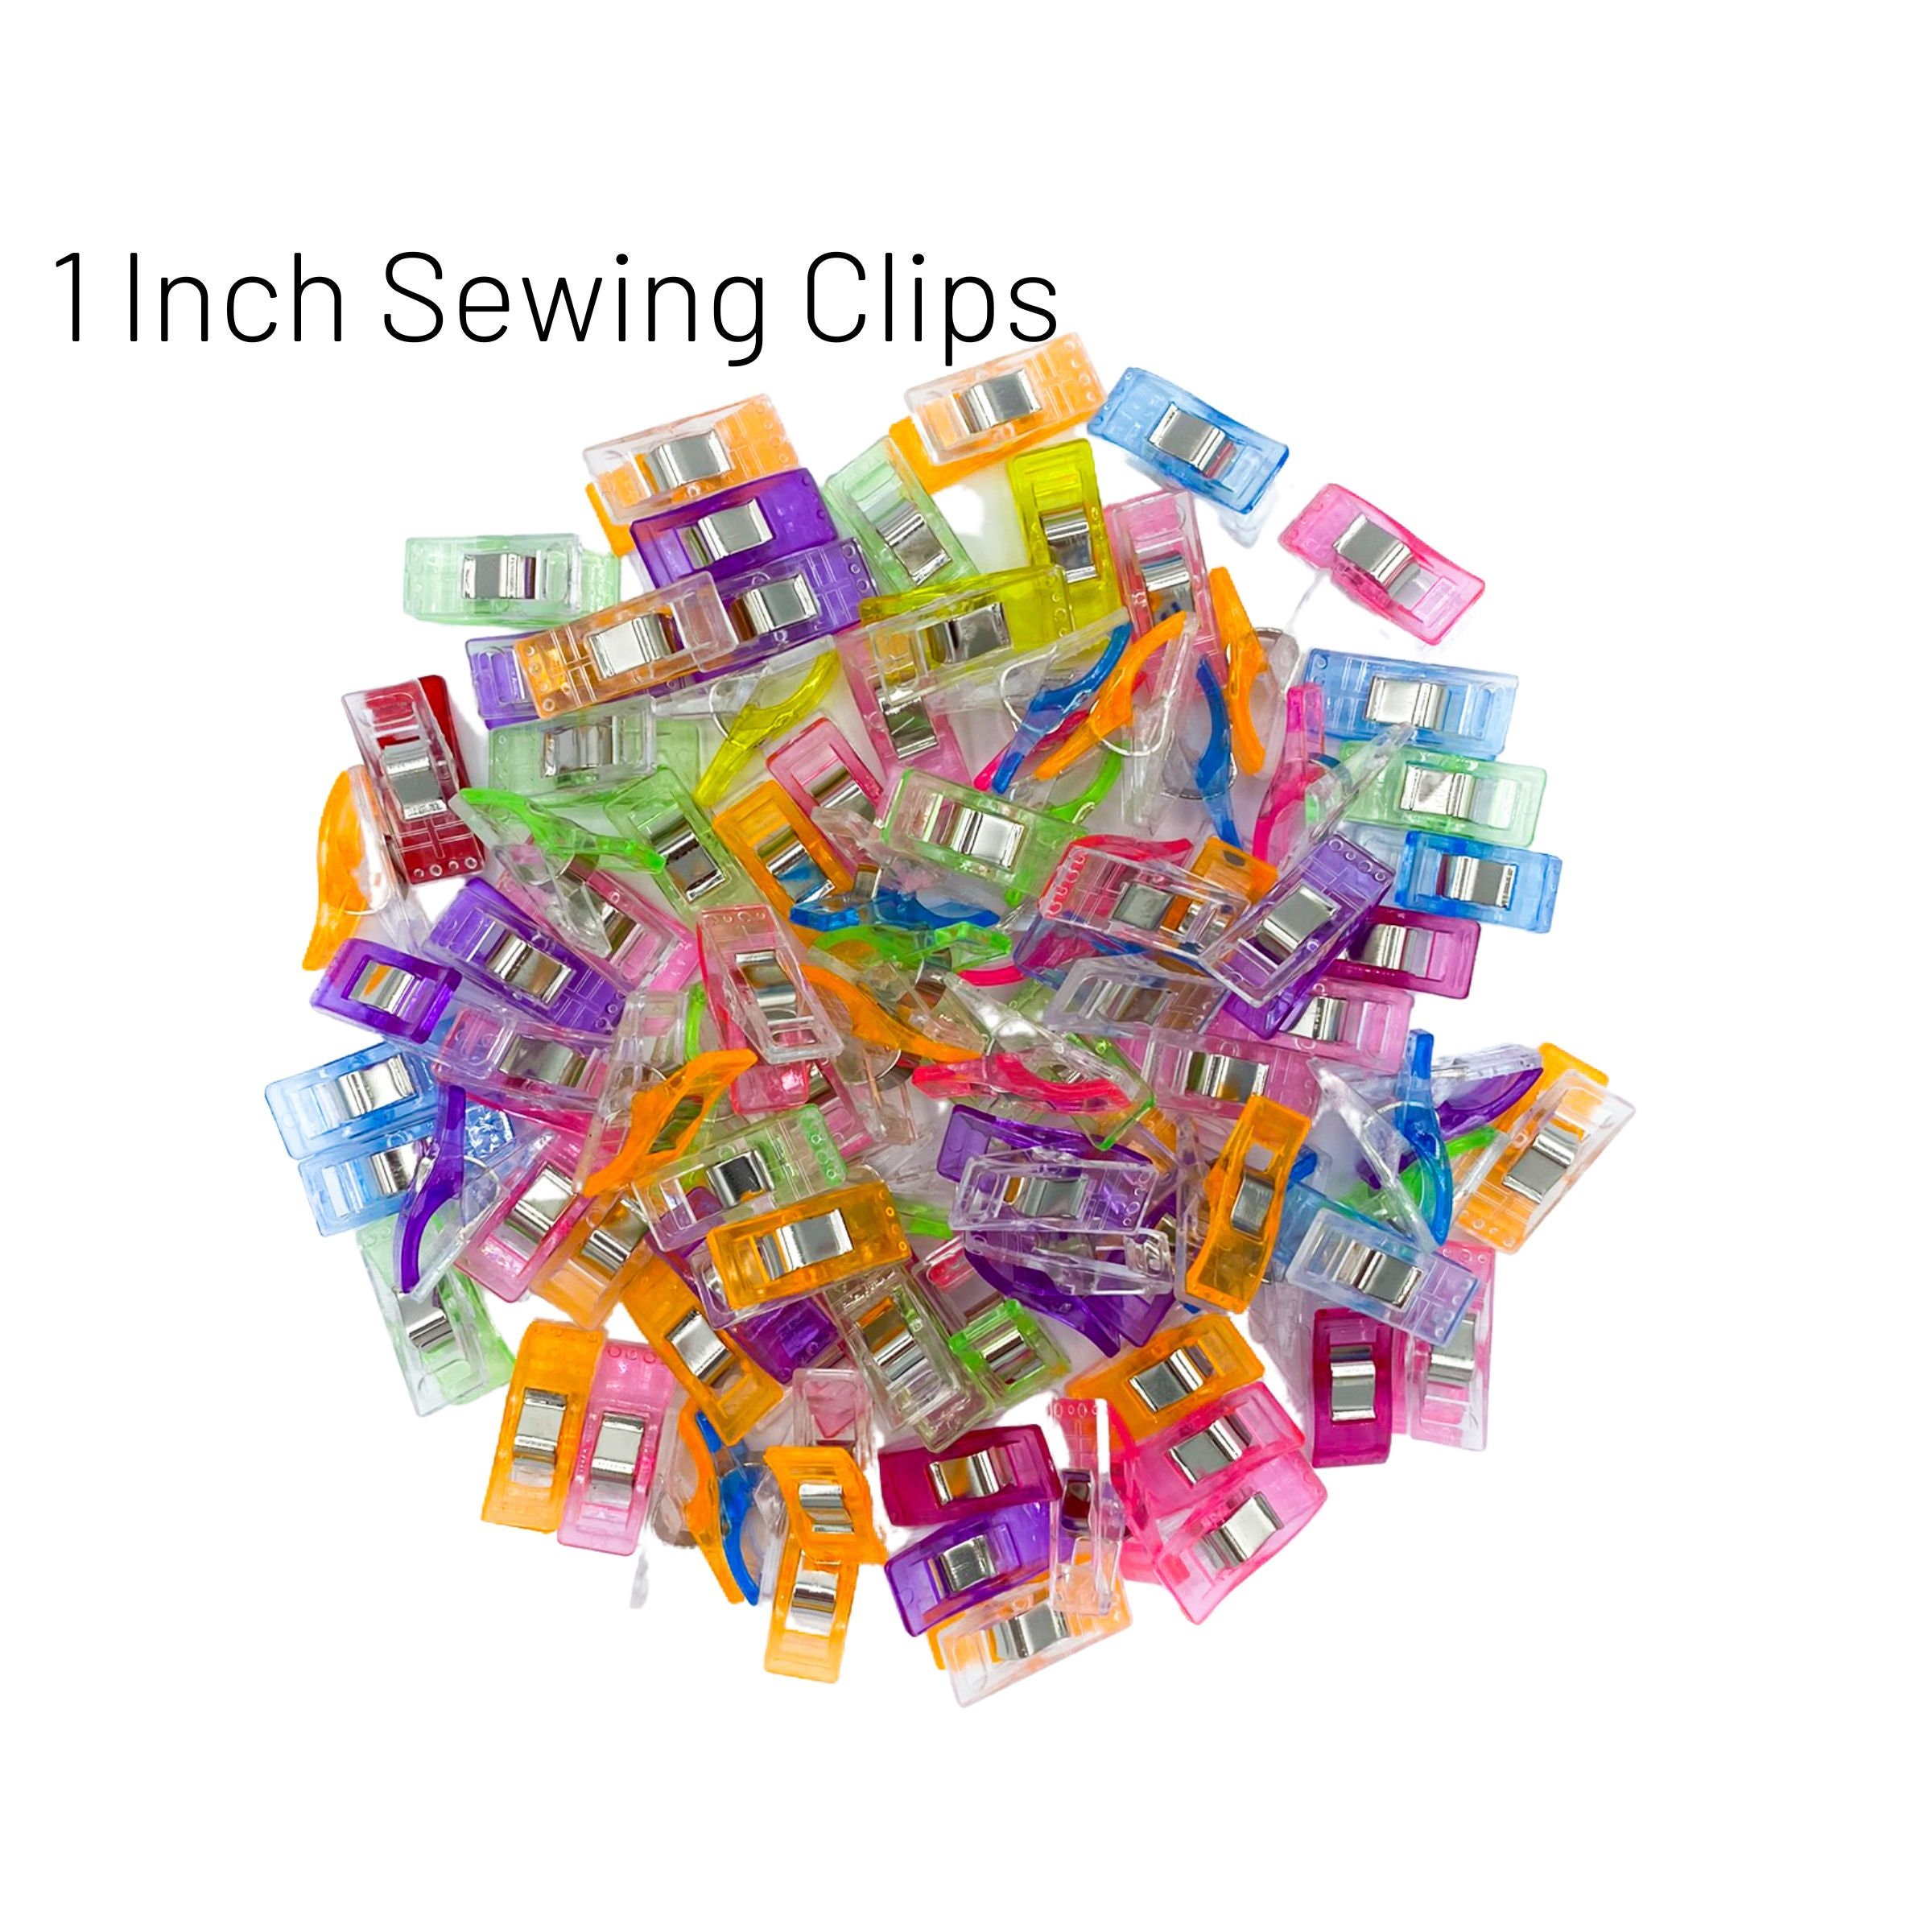 Quilting Clips Sewing Clips Fabric Clip Binding Clips Clips in Tins Sewing  Gifts Gift for Quilters Quilt Retreat Gifts 